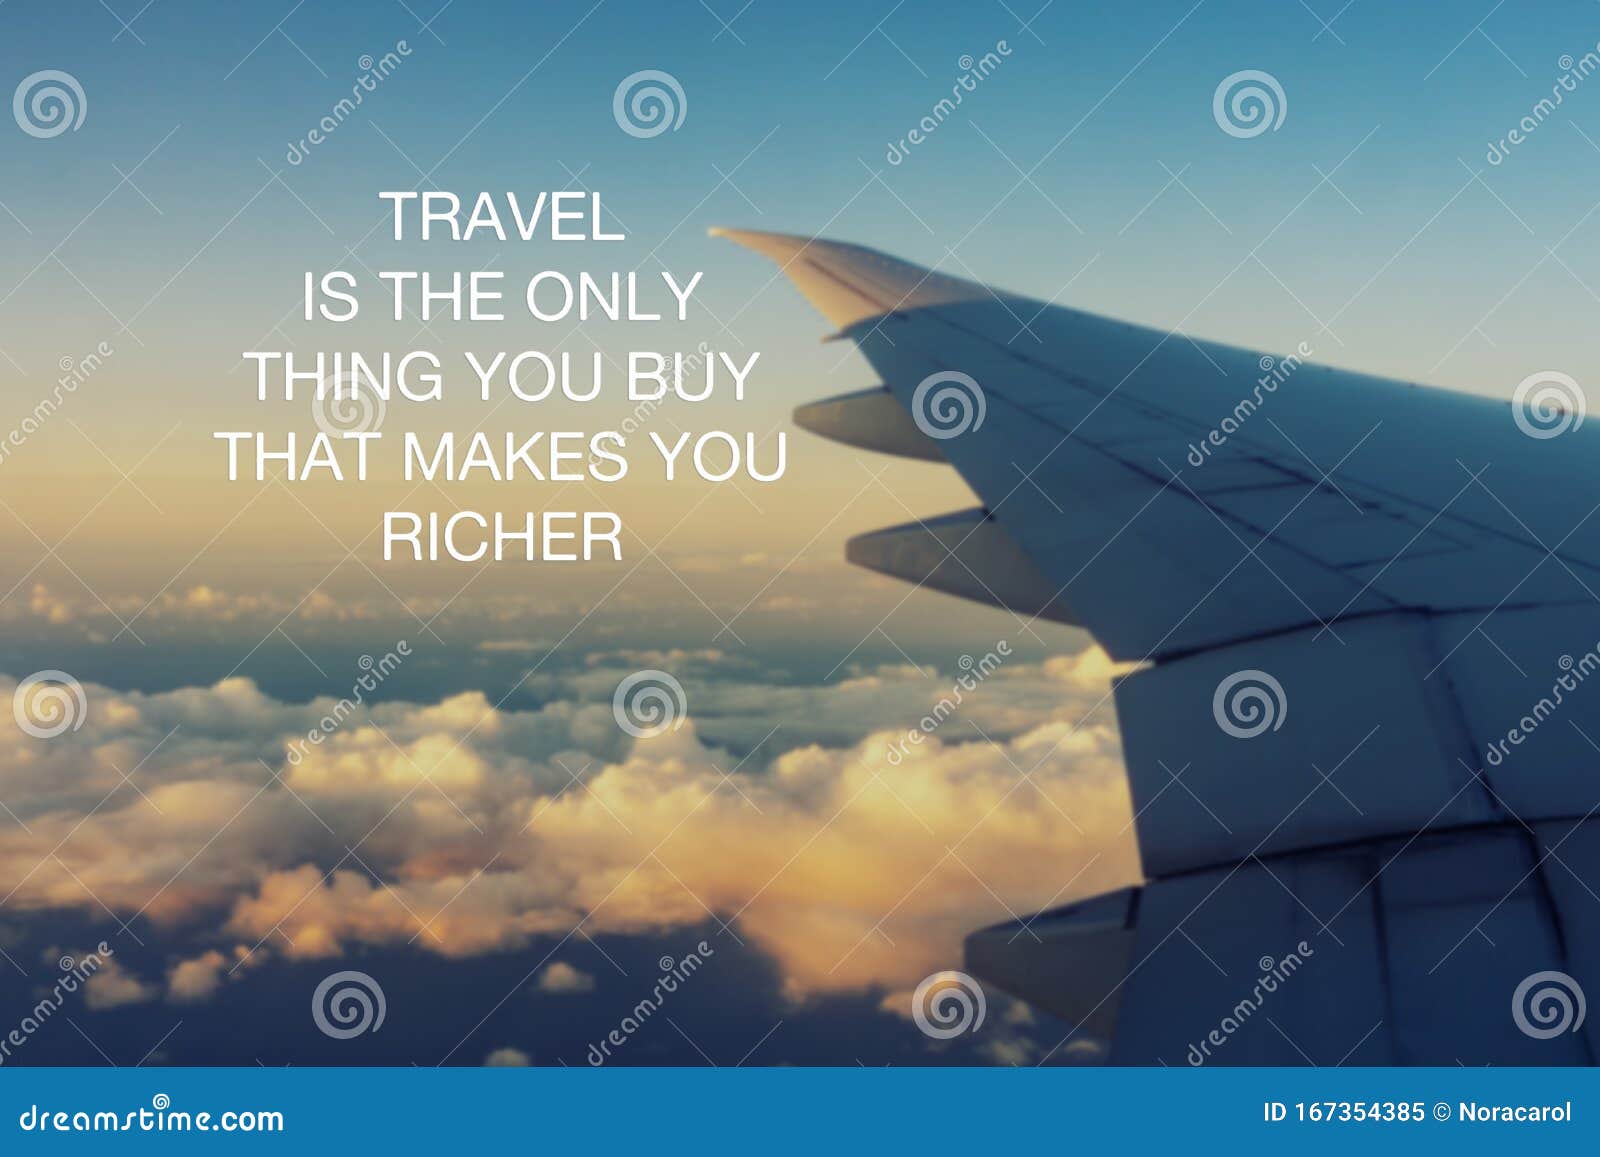 Inspirational Quotes Travel is the only Thing You Buy that Makes You